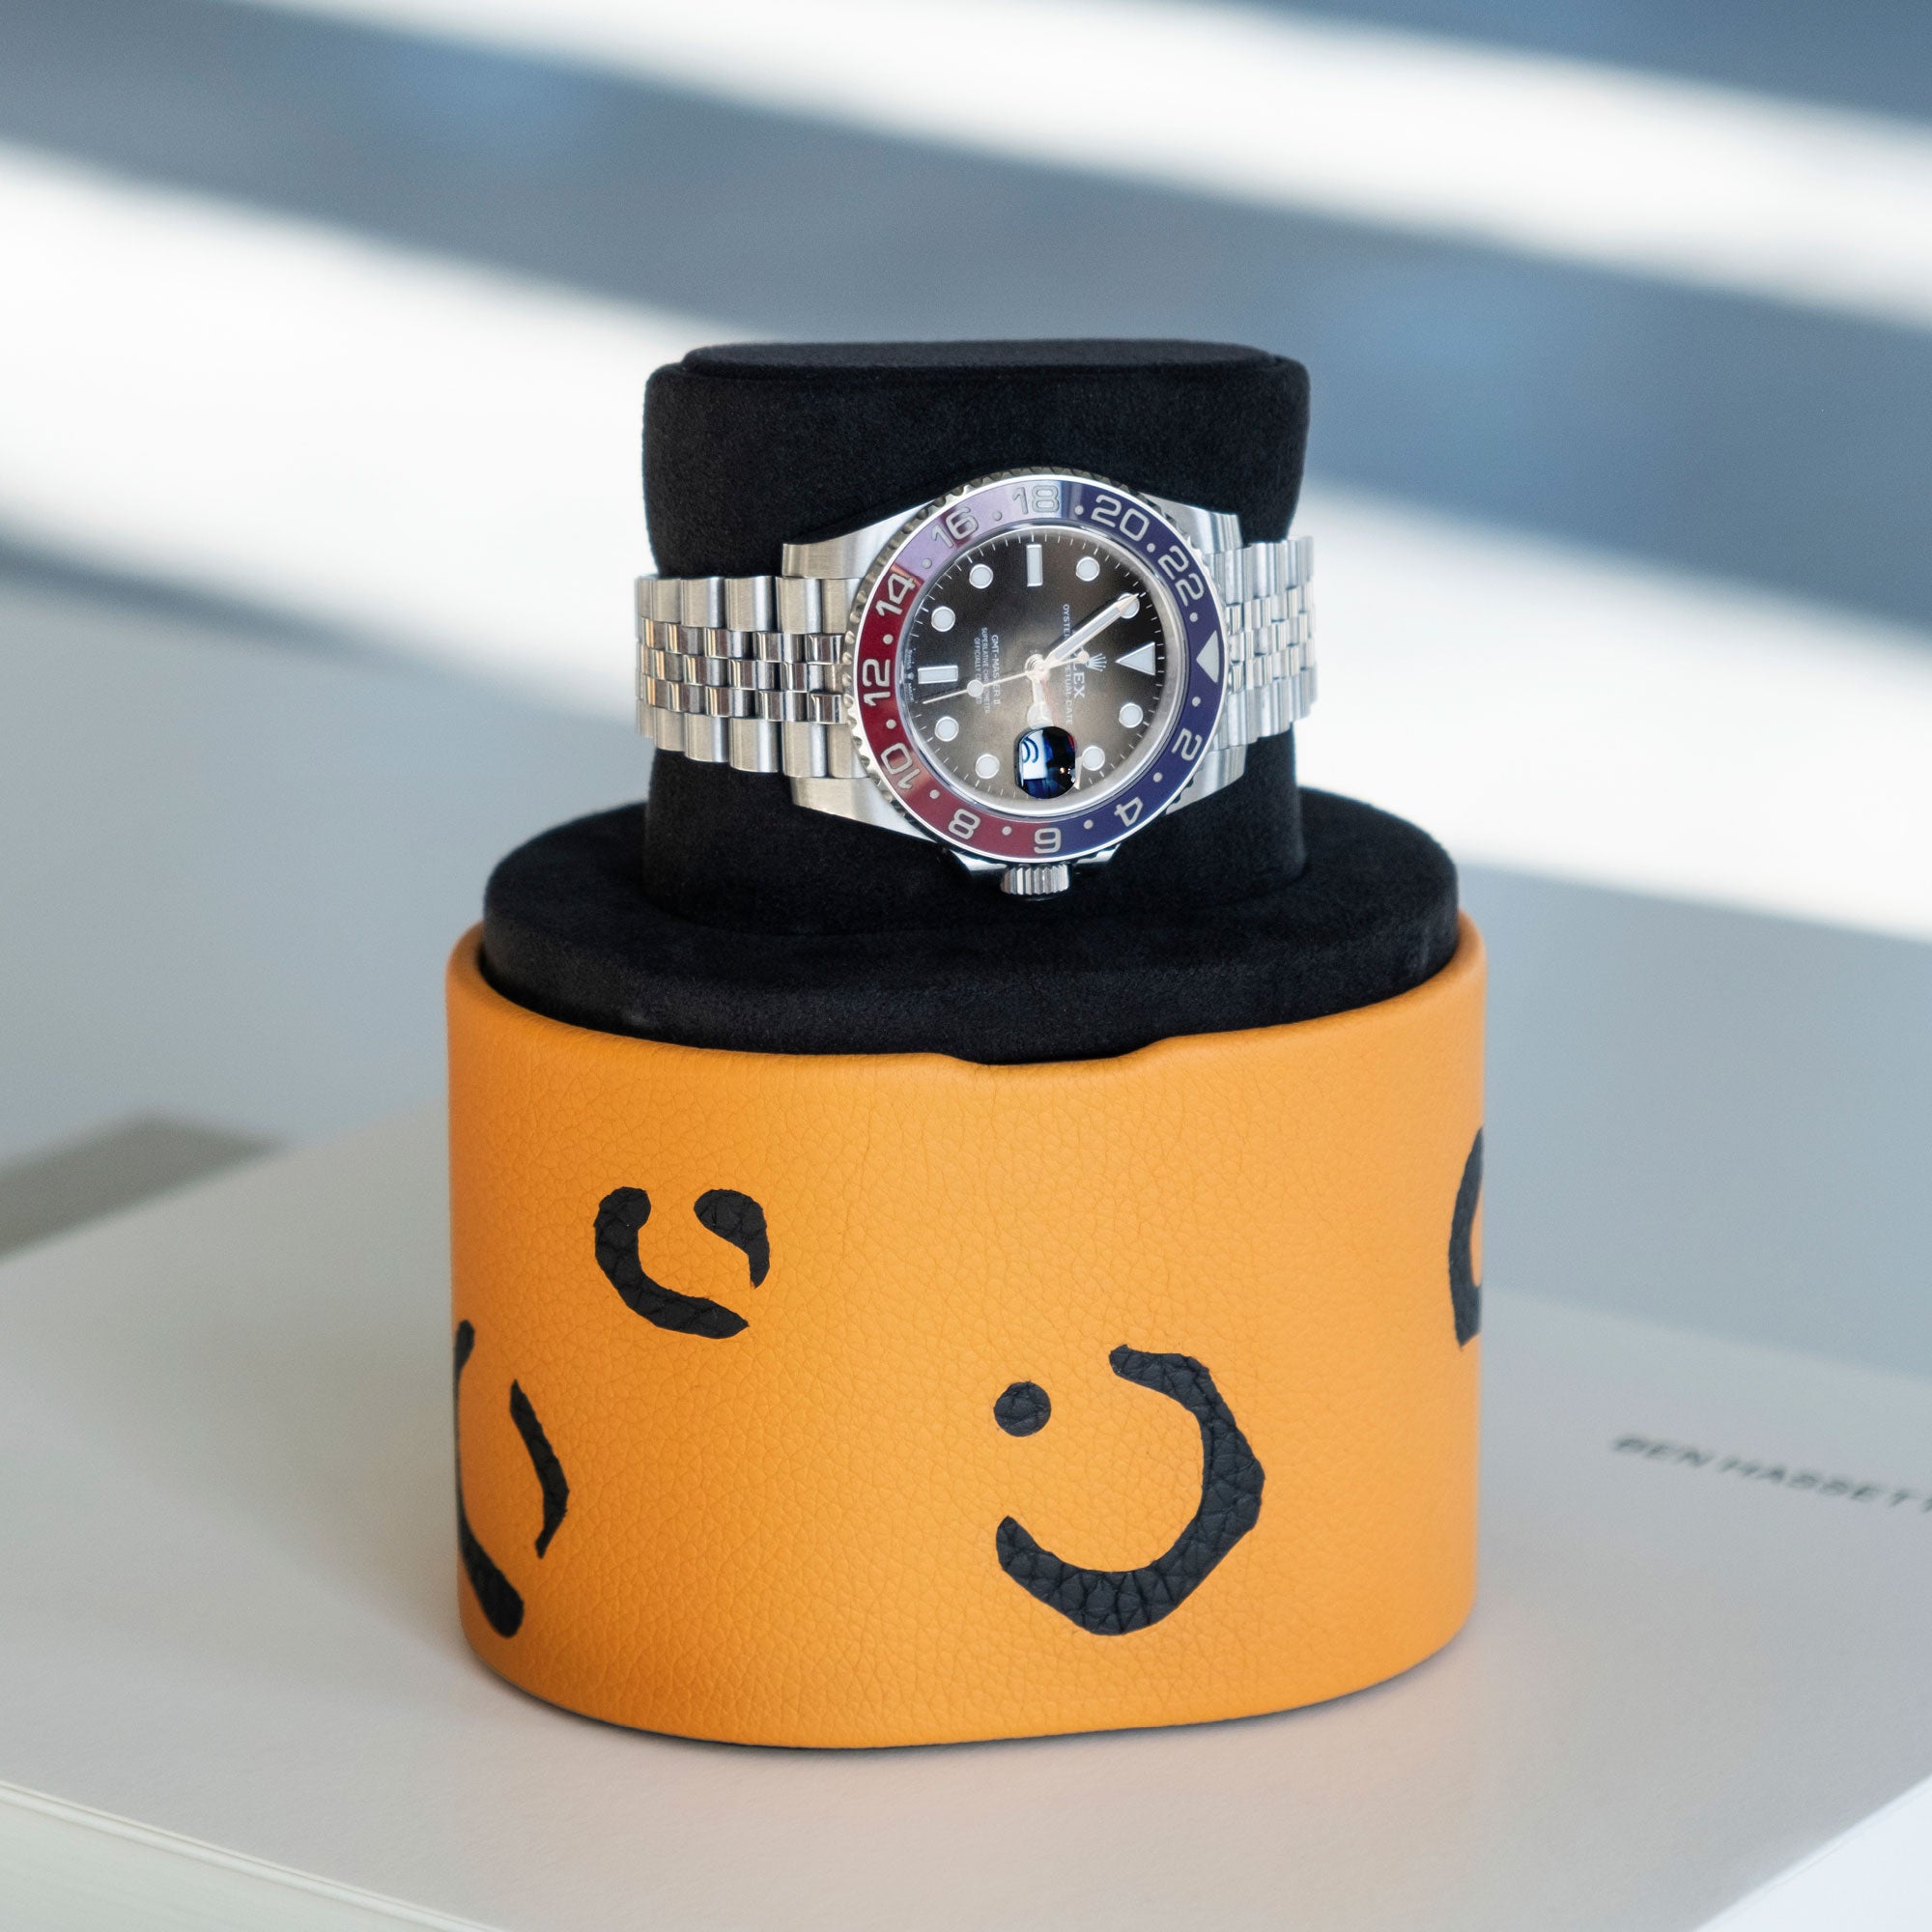 Luxury watch displayed on leopard Theo Watch roll in convenient portable watch stand position 